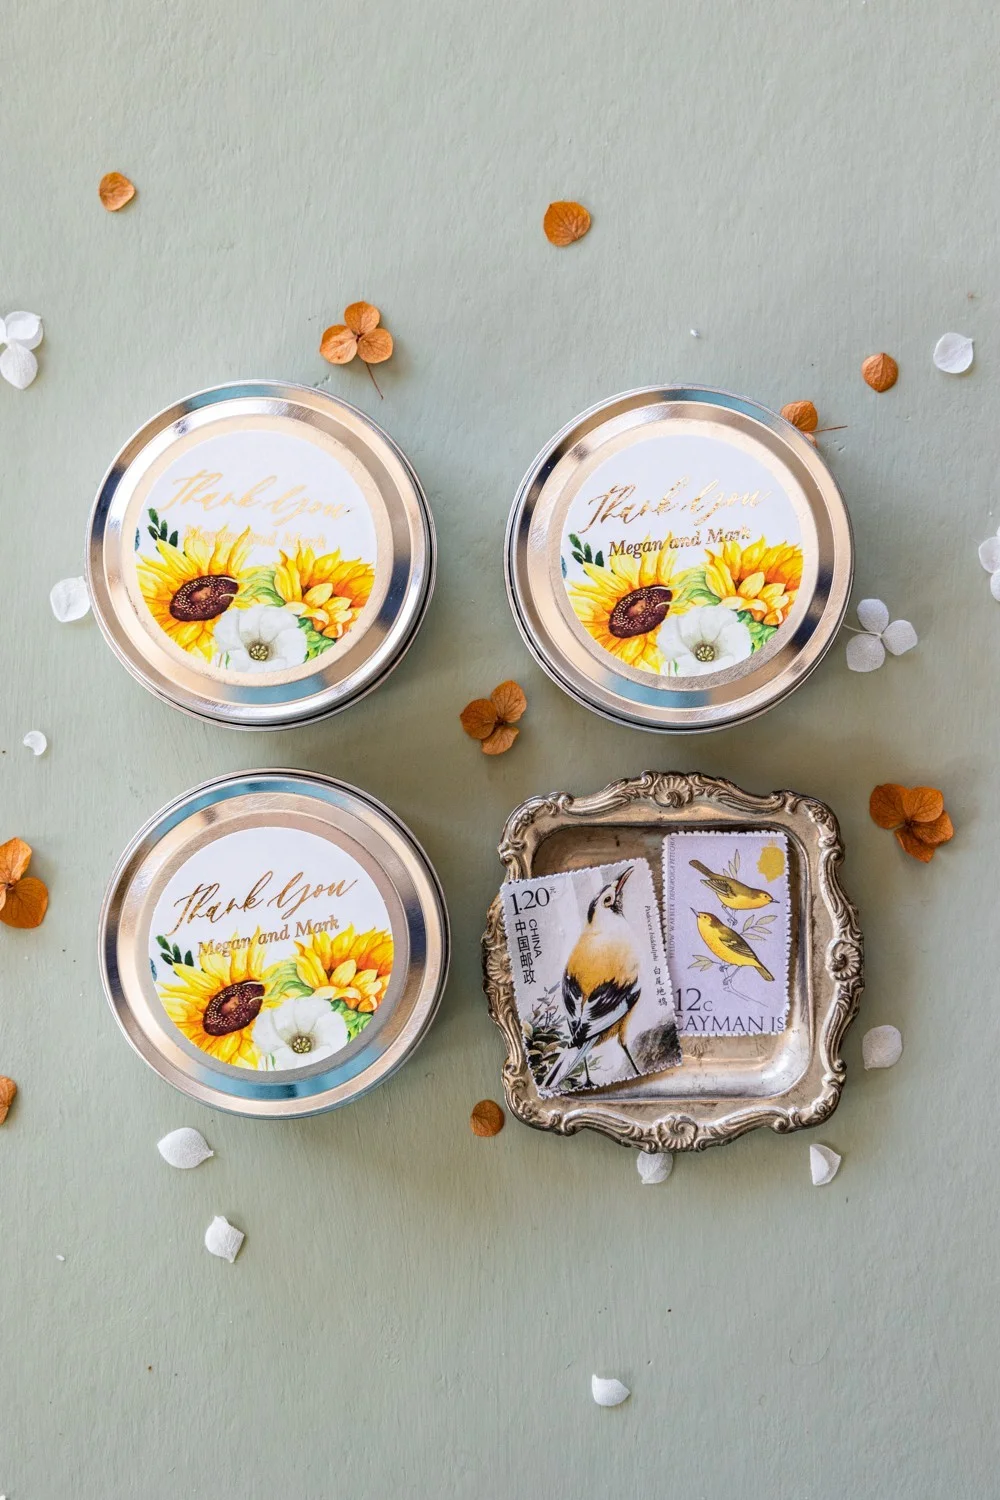 Personalized, handmade Soy Wax Candles Favors for your Wedding Guests with gold text and sunflowers